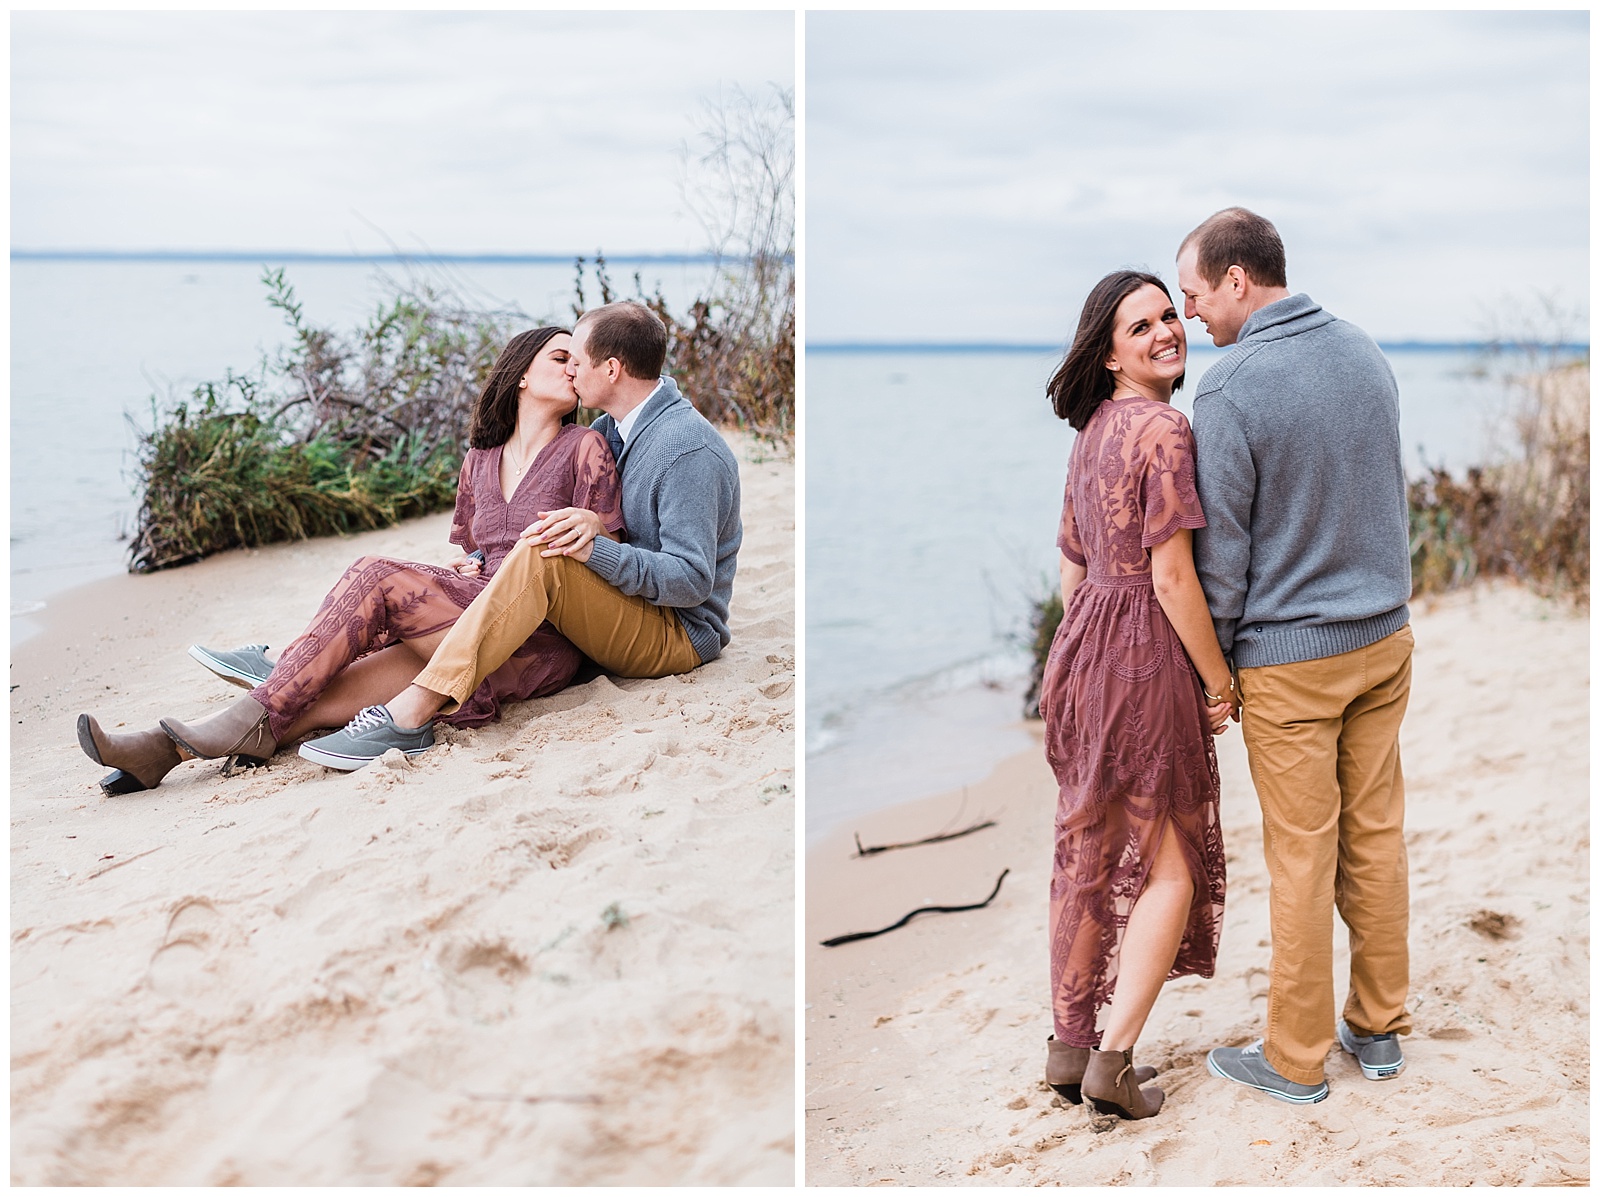 Traverse City engagement session on beach in Old Mission Peninsula.